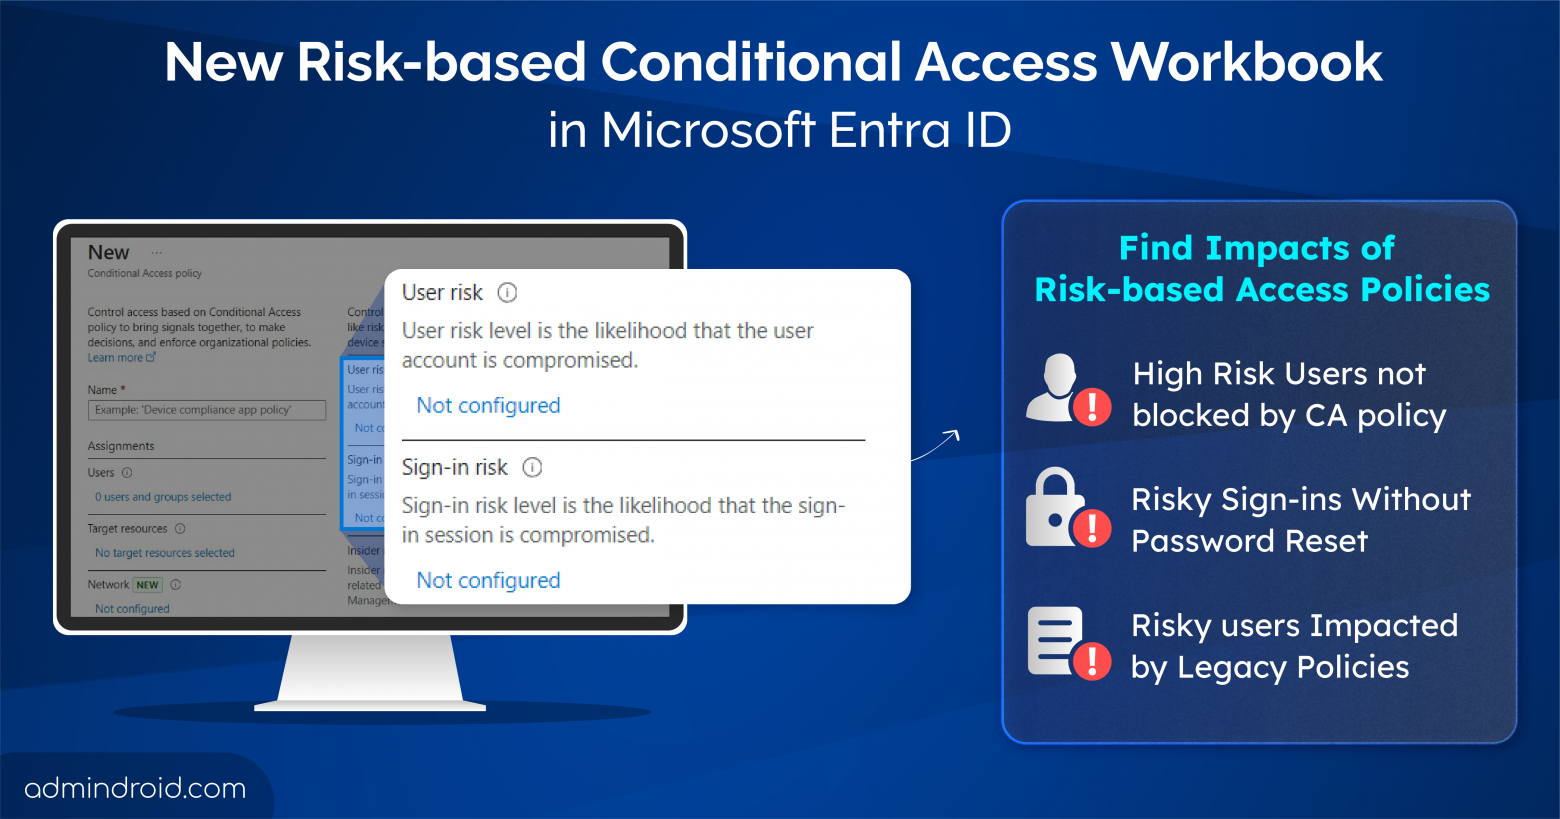 New Risk-based Access Policies Workbook in Entra ID